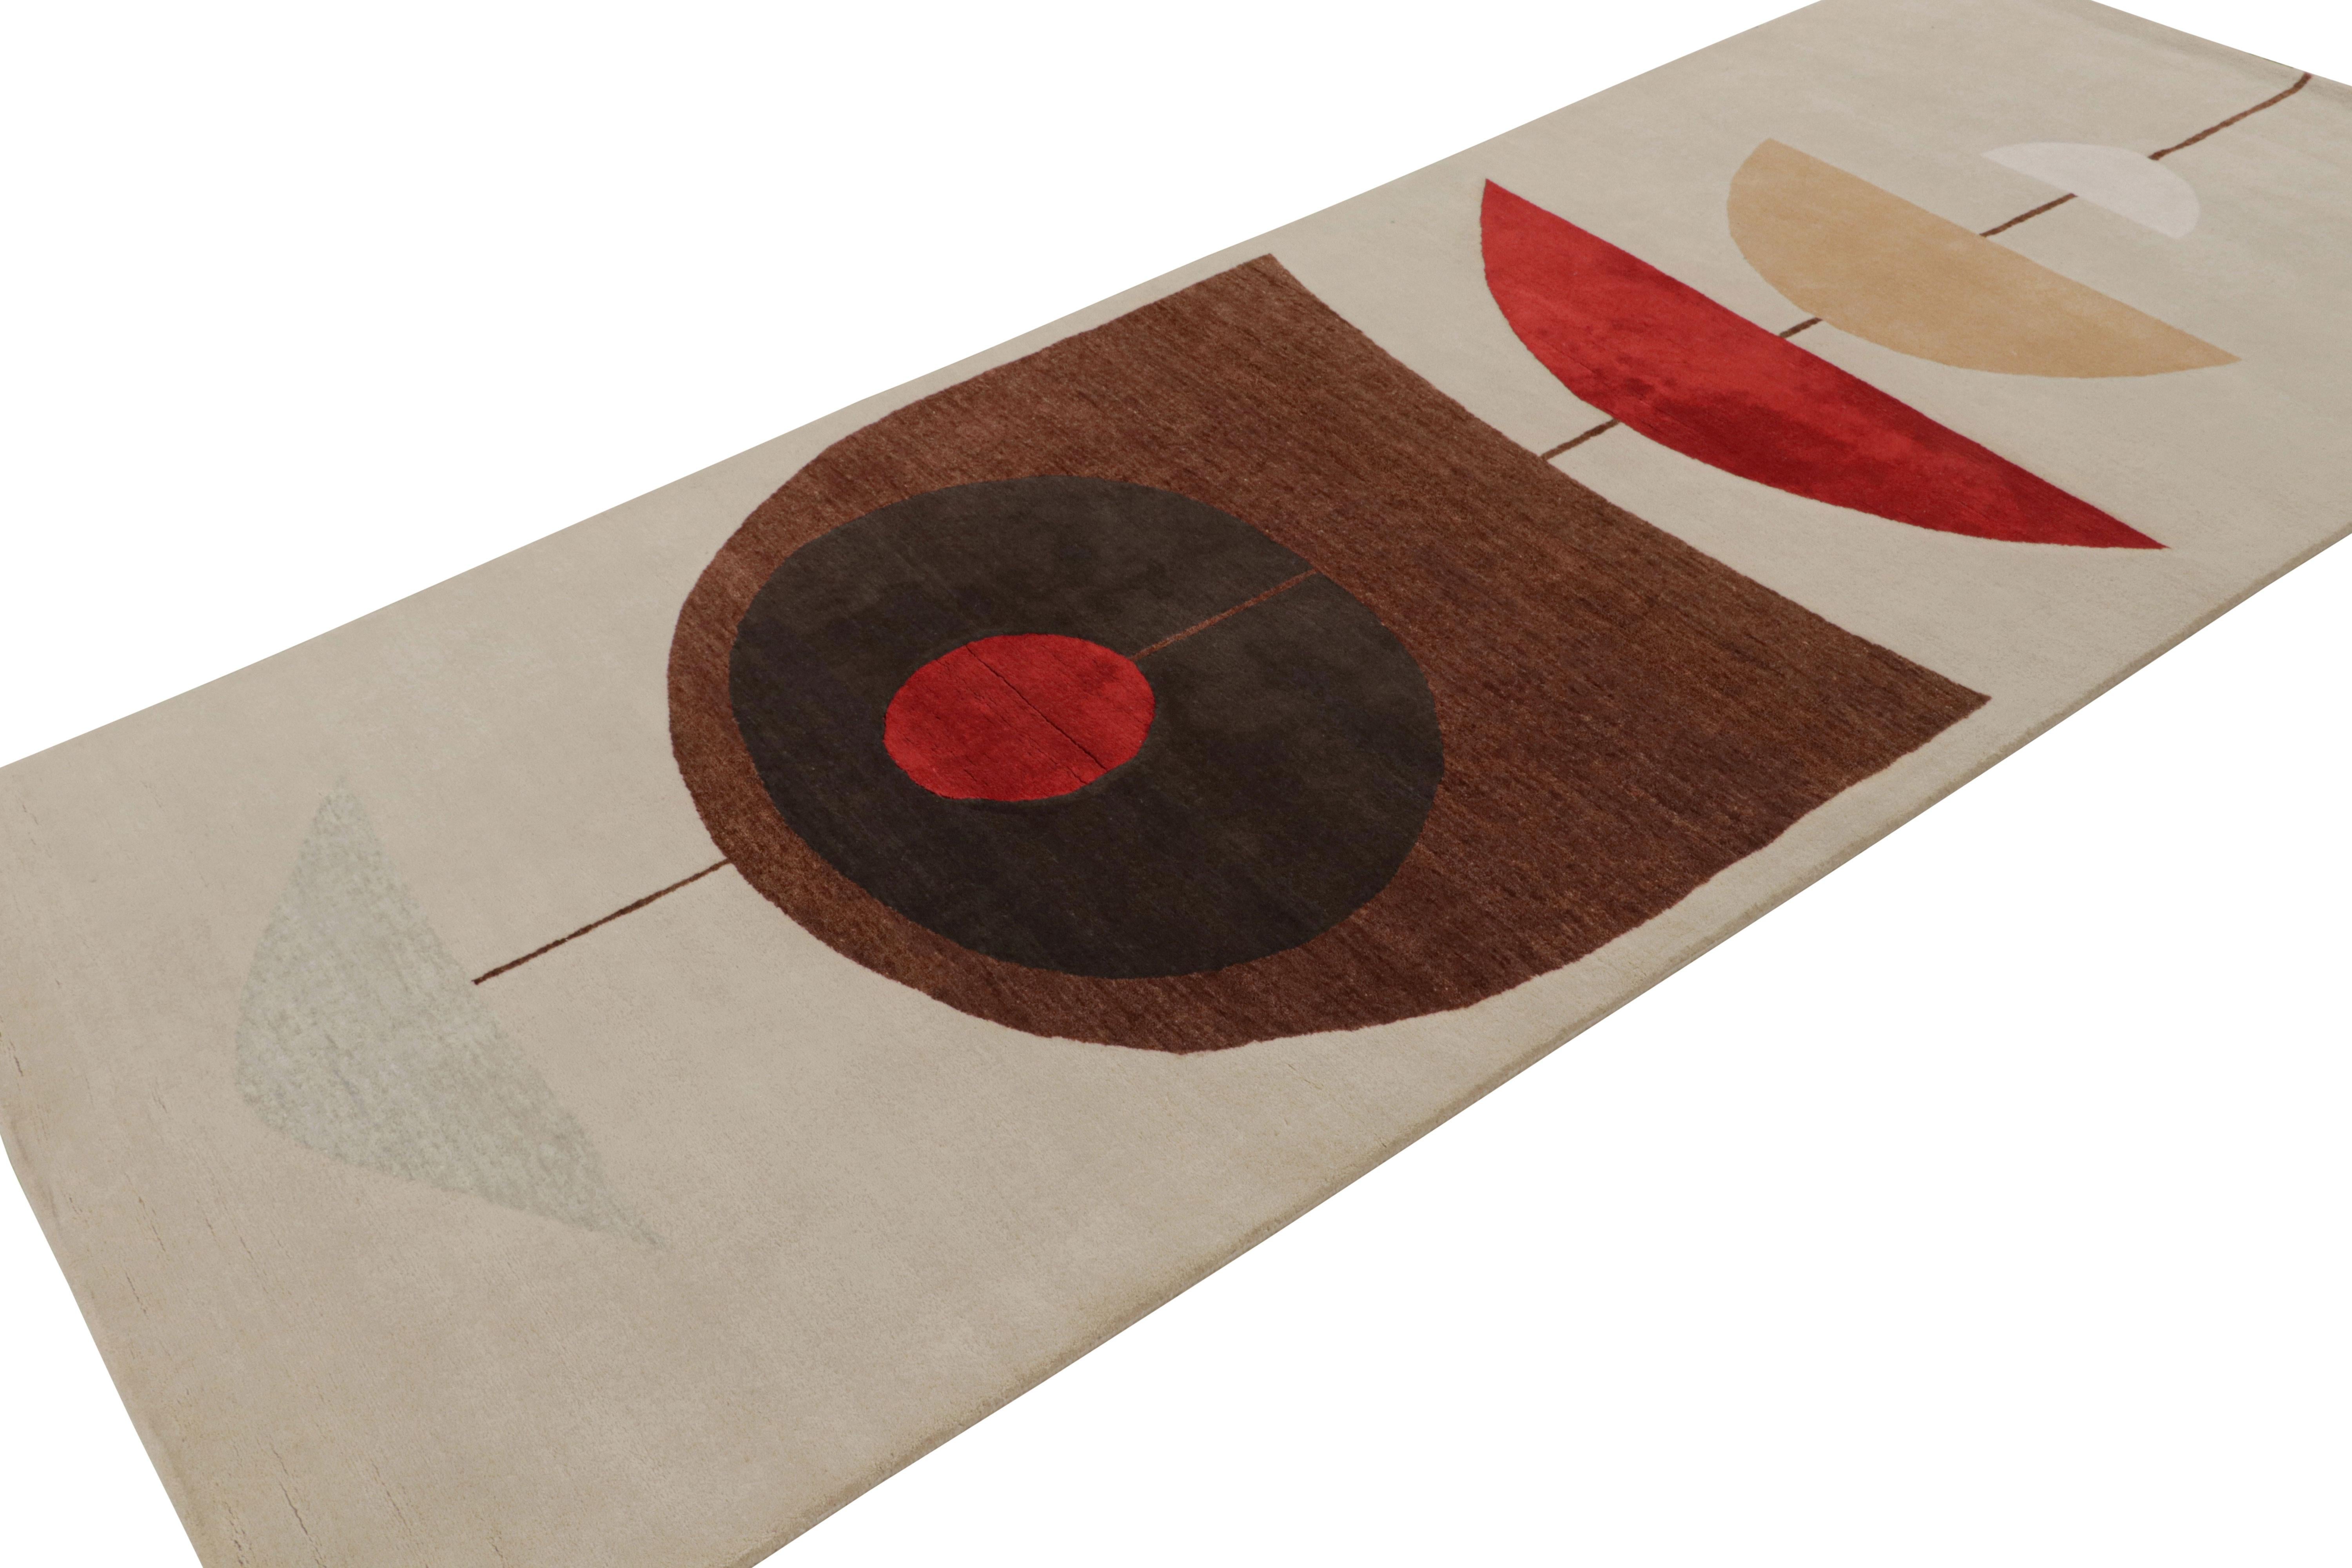 This 4x10 rug is from Rug & Kilim’s Mid-Century Modern collection in collaboration with Jenn Ski—hand-knotted in wool and silk

On the Design:

Keen eyes will admire beige underscoring rich brown and red tones in a geometric pattern inspired by